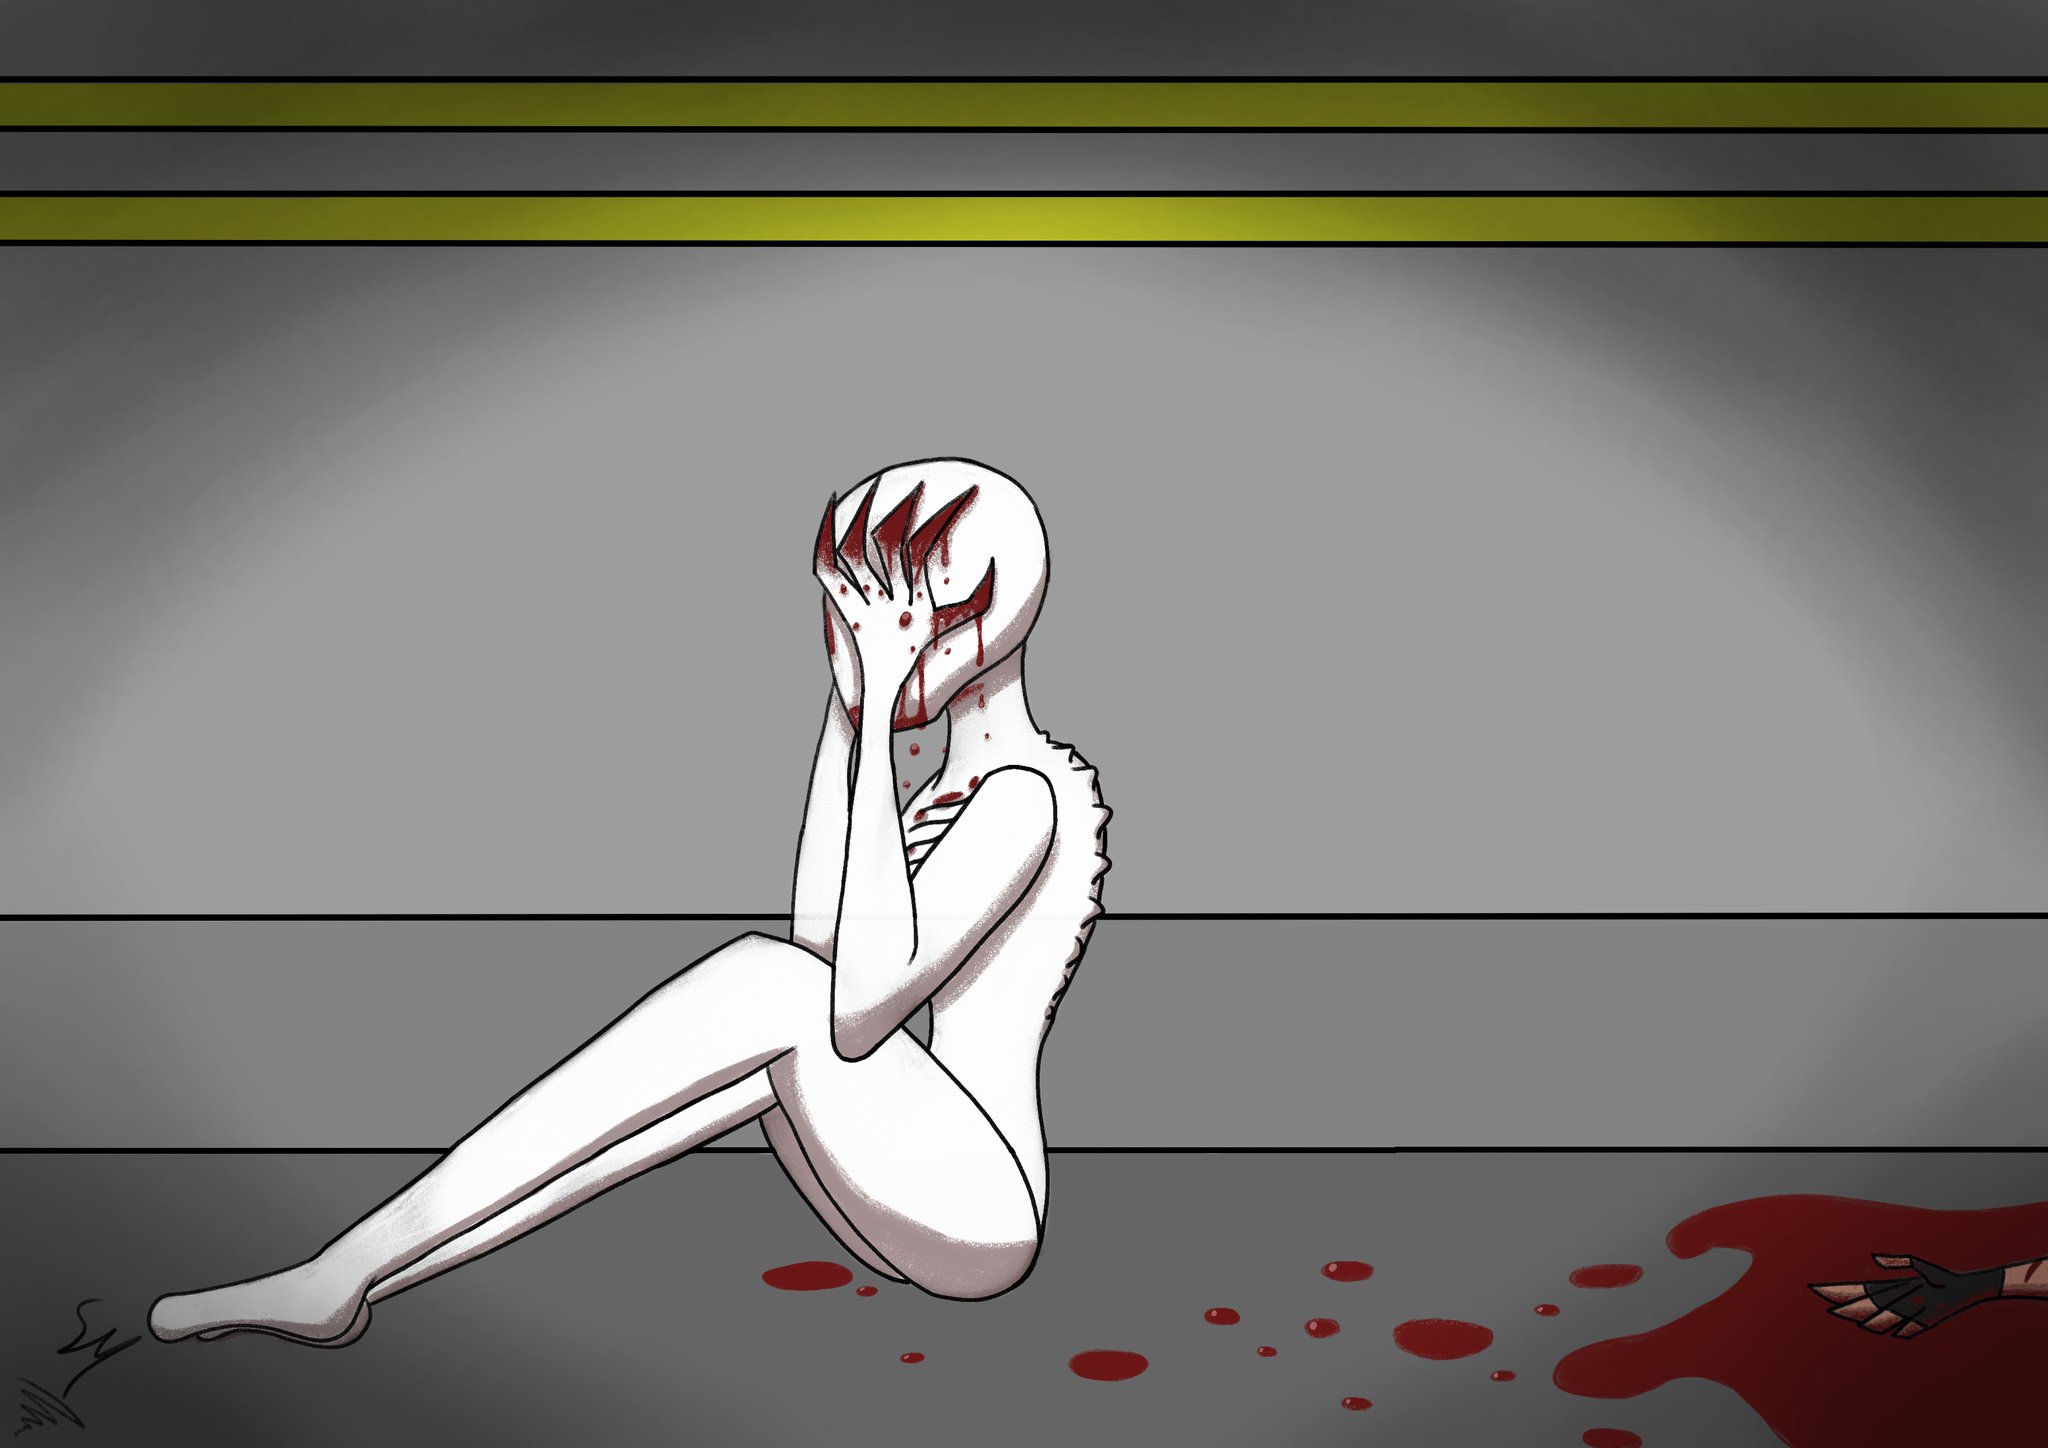 blind girl and 096 :/ #scp #scpfoundation #scp096 #blindgirl #scpillus, scp-001 when the day breaks